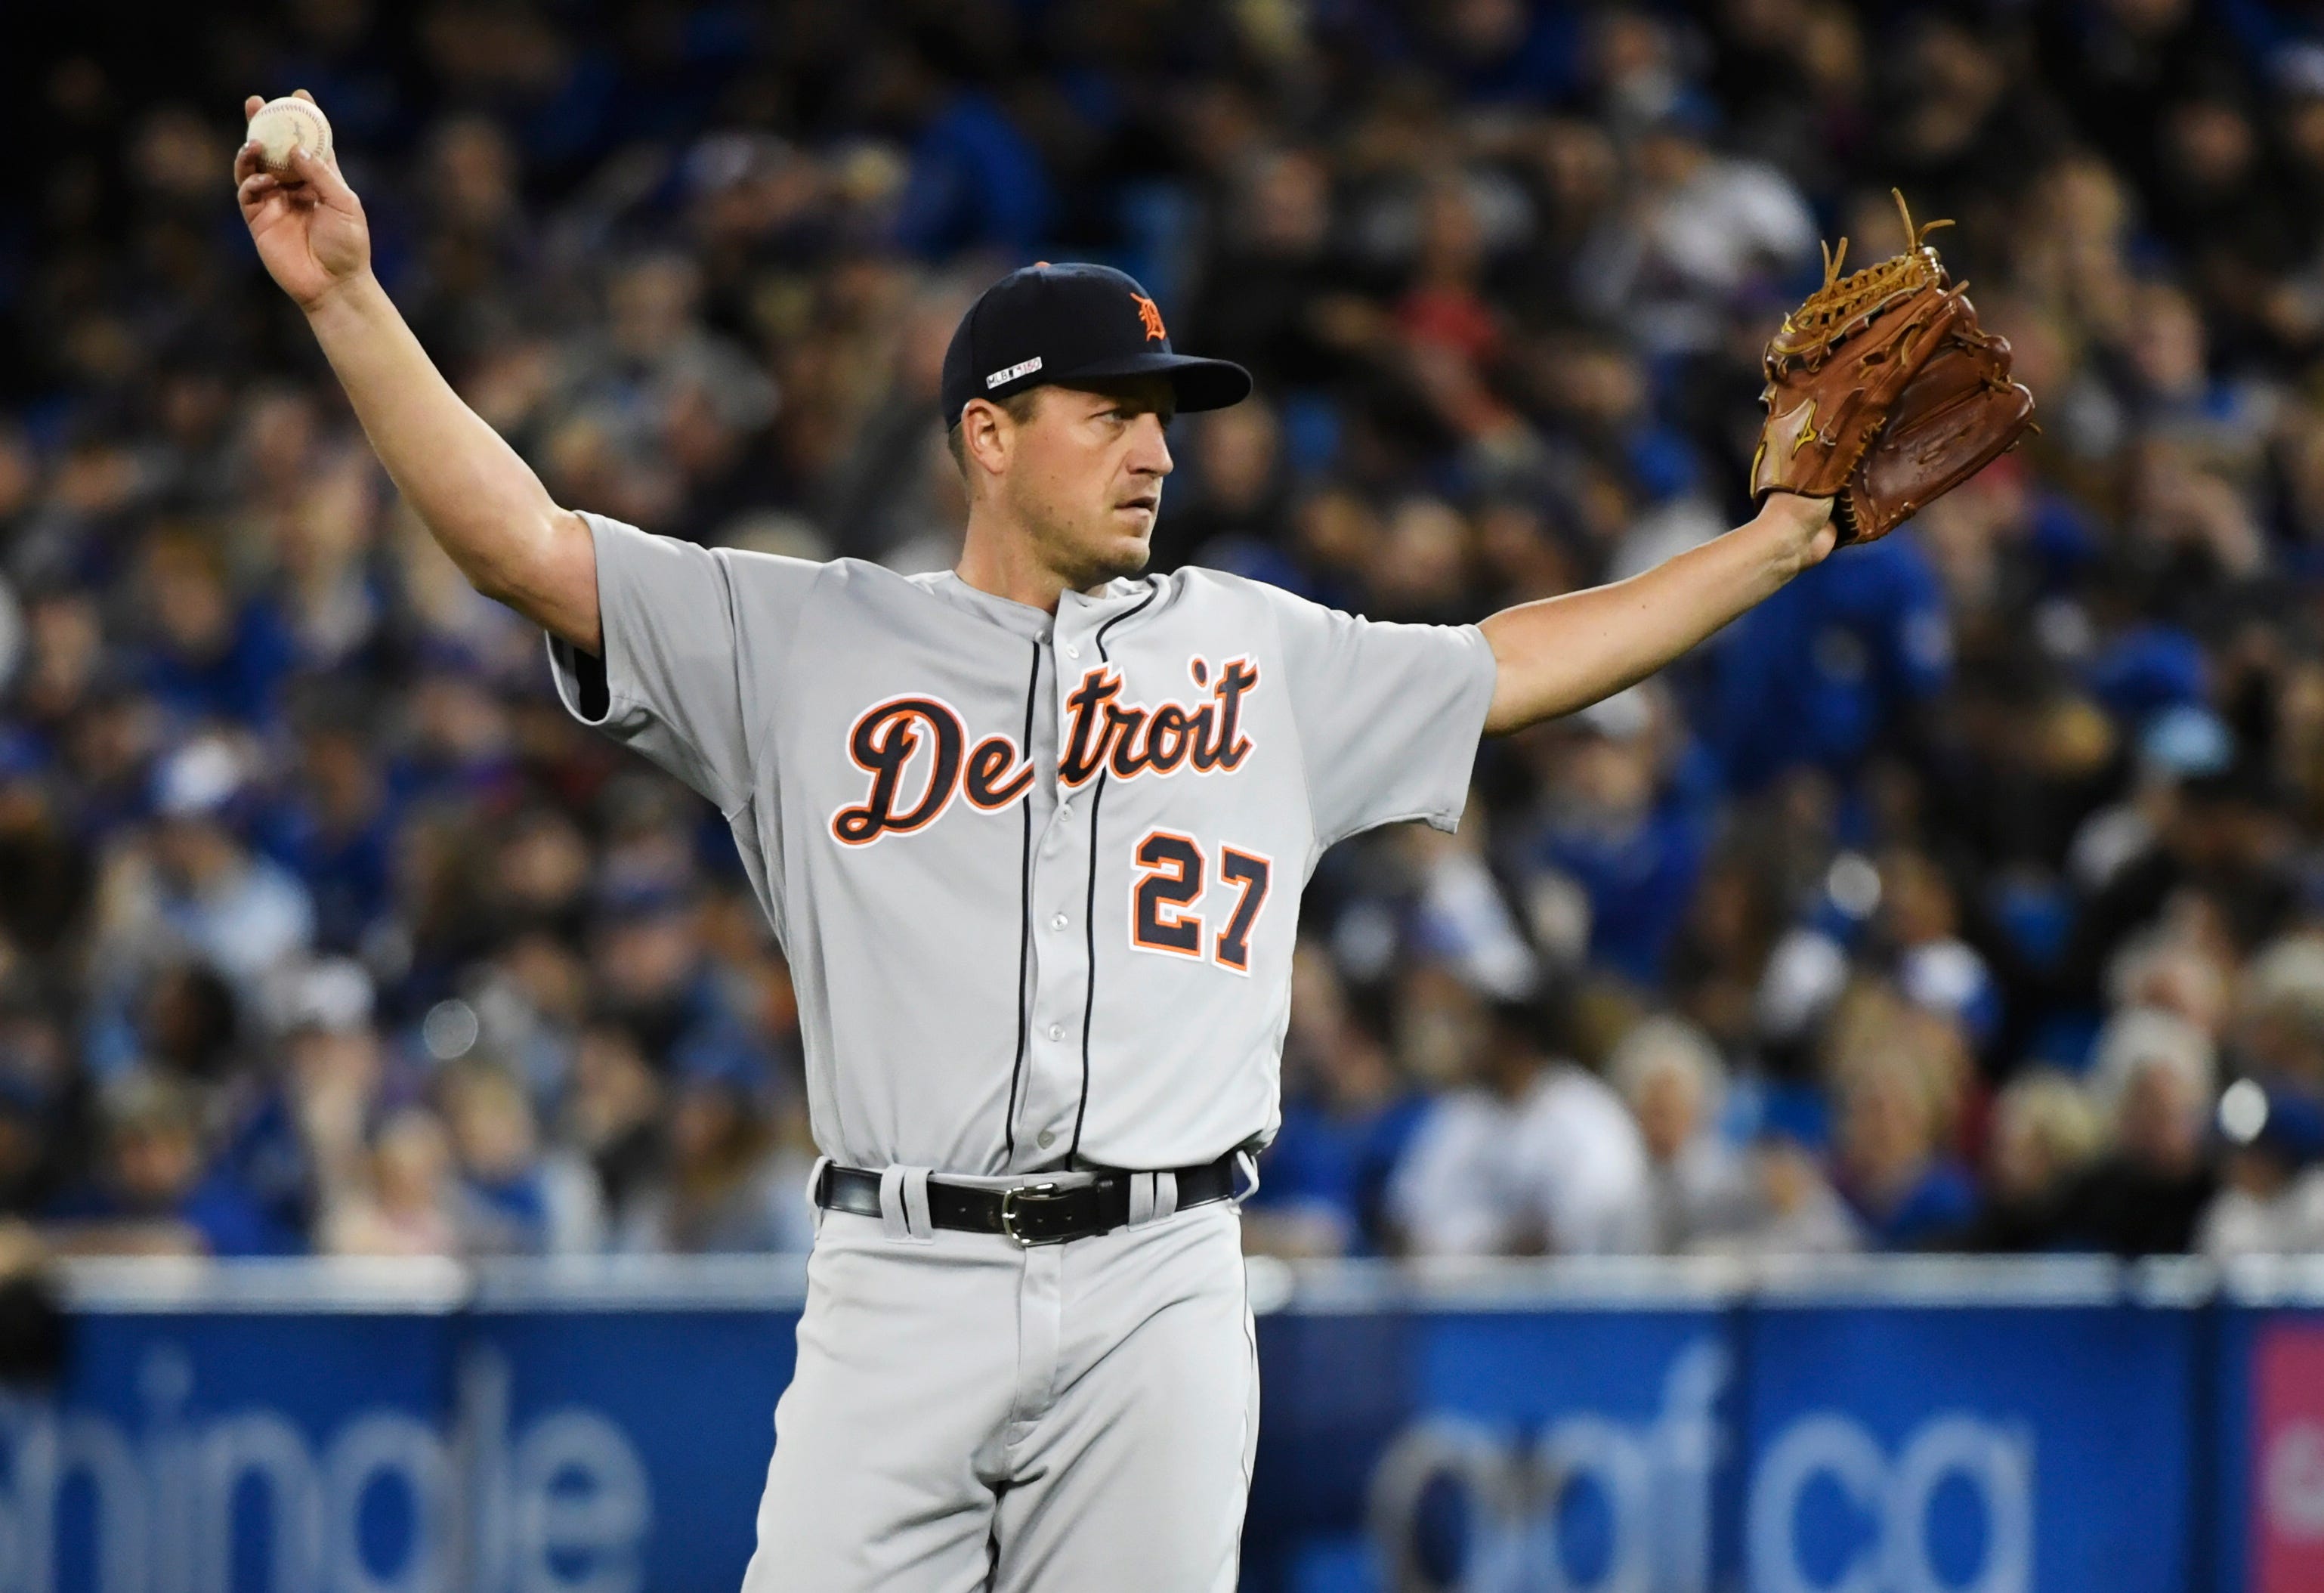 Tigers starting pitcher Jordan Zimmermann reacts after giving up a hit to Blue Jays left fielder Teoscar Hernandez, not shown, during the seventh inning in Toronto on Thursday, March 28, 2019.